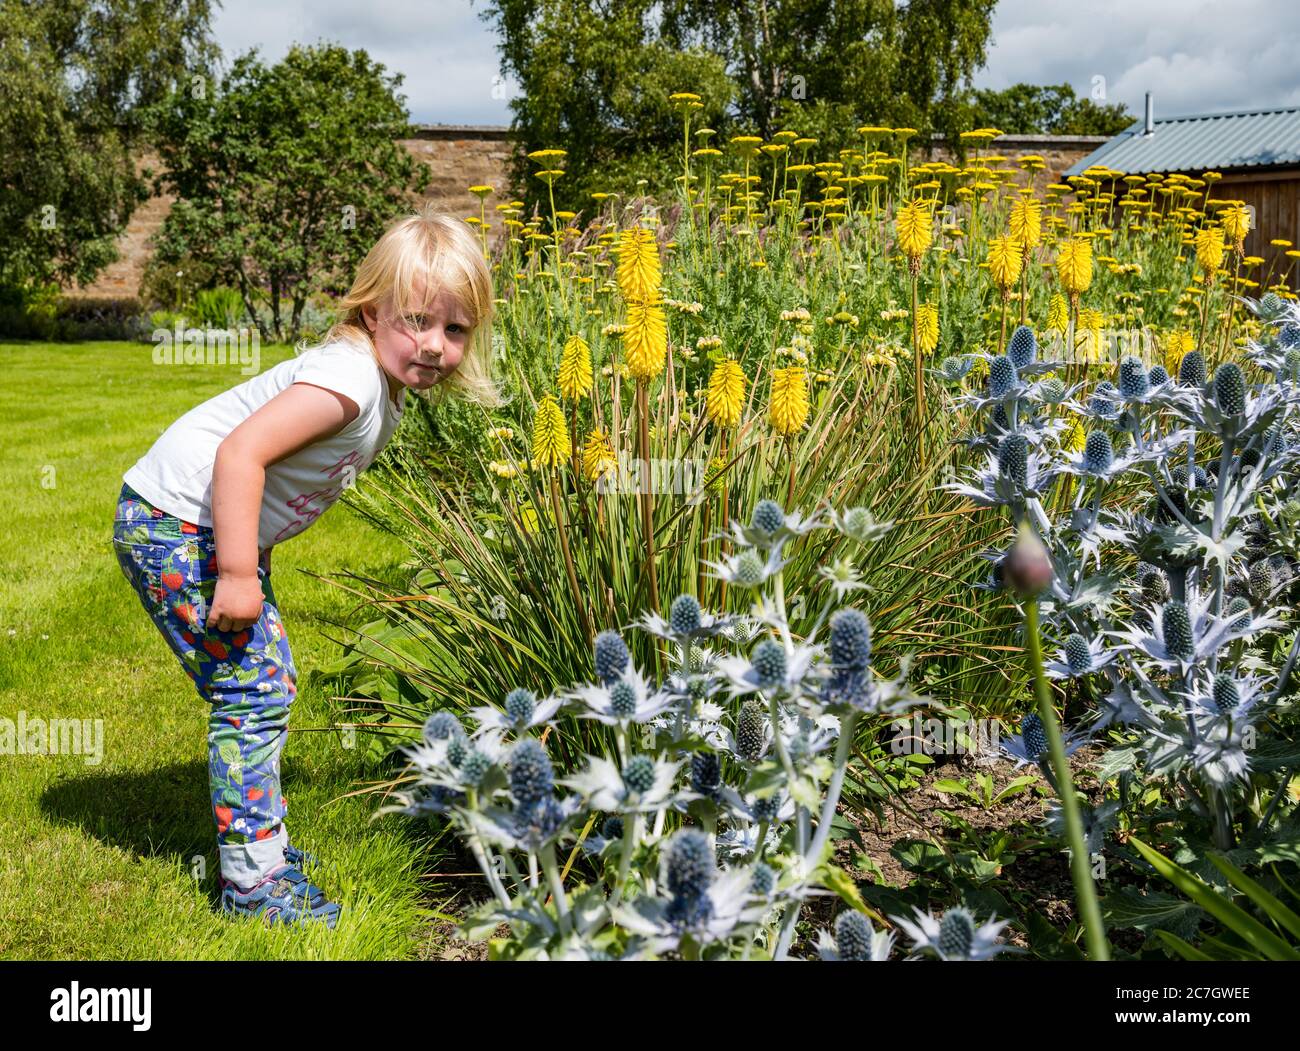 Young girl with flowers and sea holly (Eryngium), Amisfield Walled Garden, Haddington, East Lothian, Scotland, UK Stock Photo